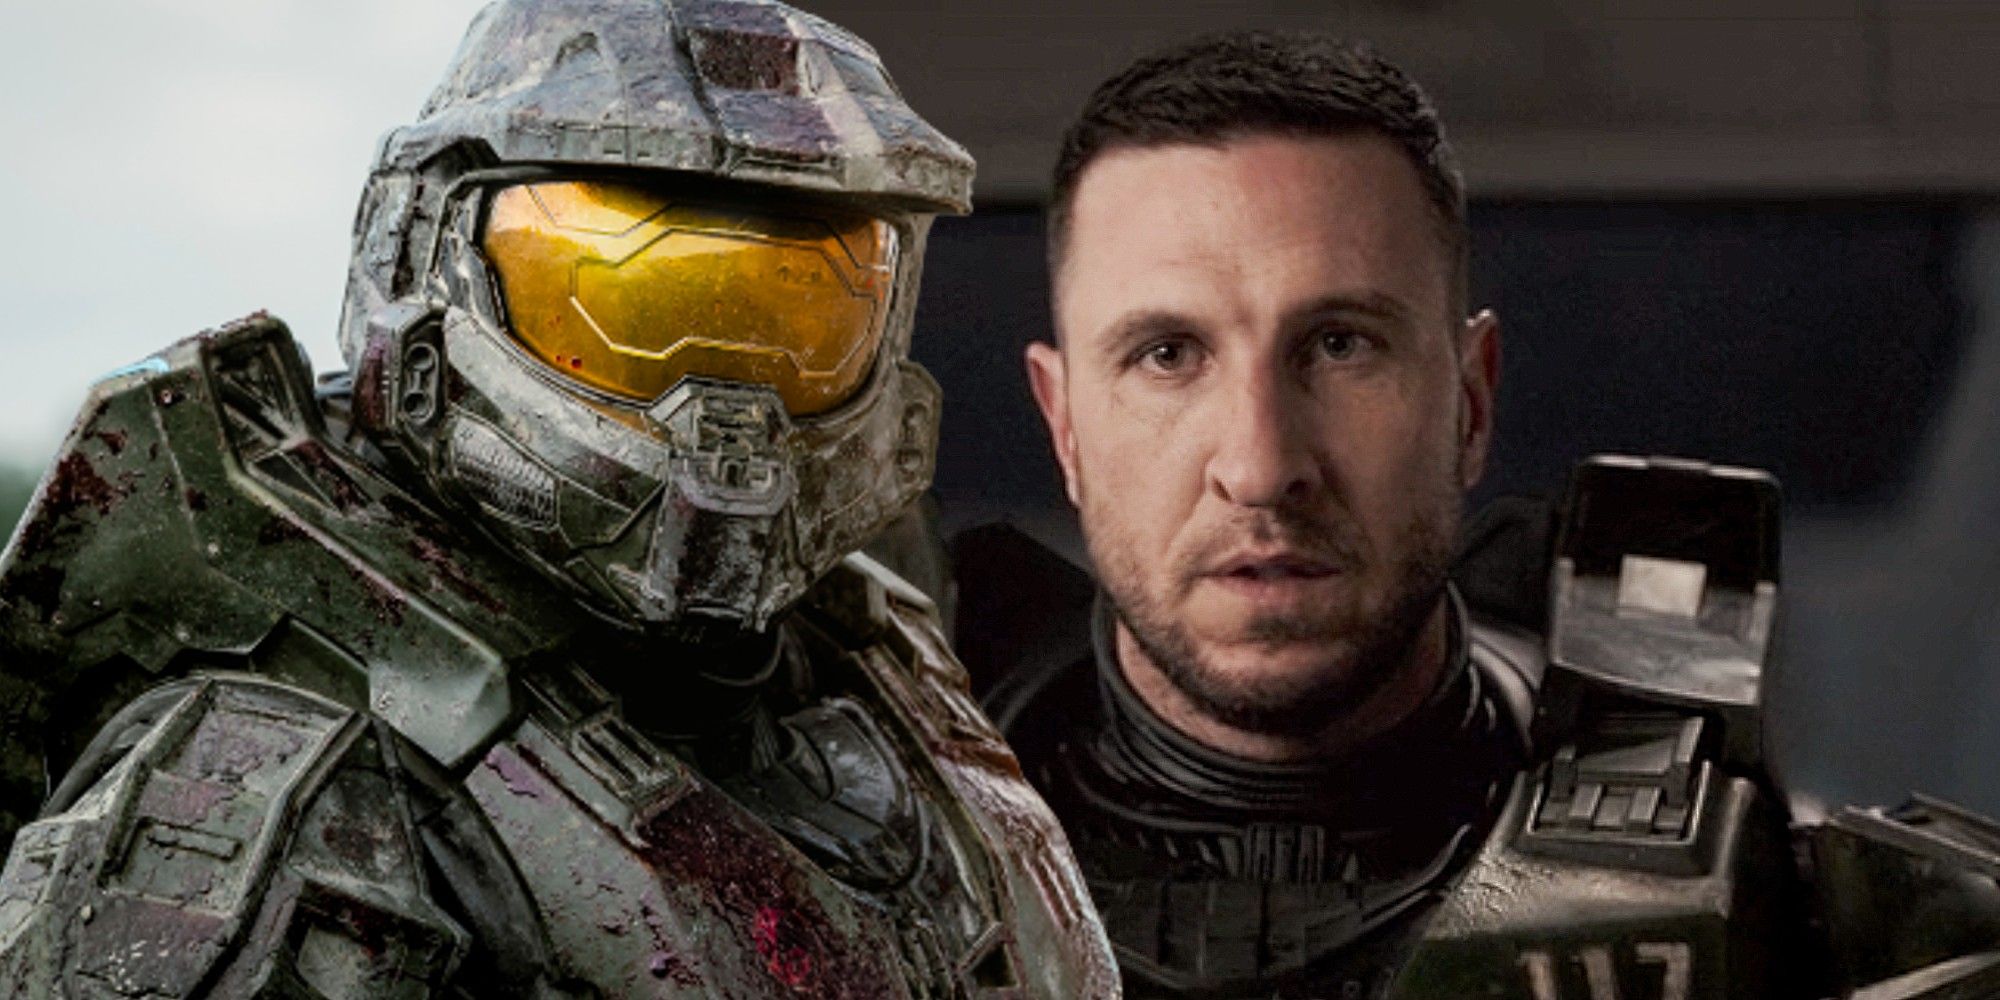 Halo Series Finally Reveals First-Ever Look at Master Chief's Face